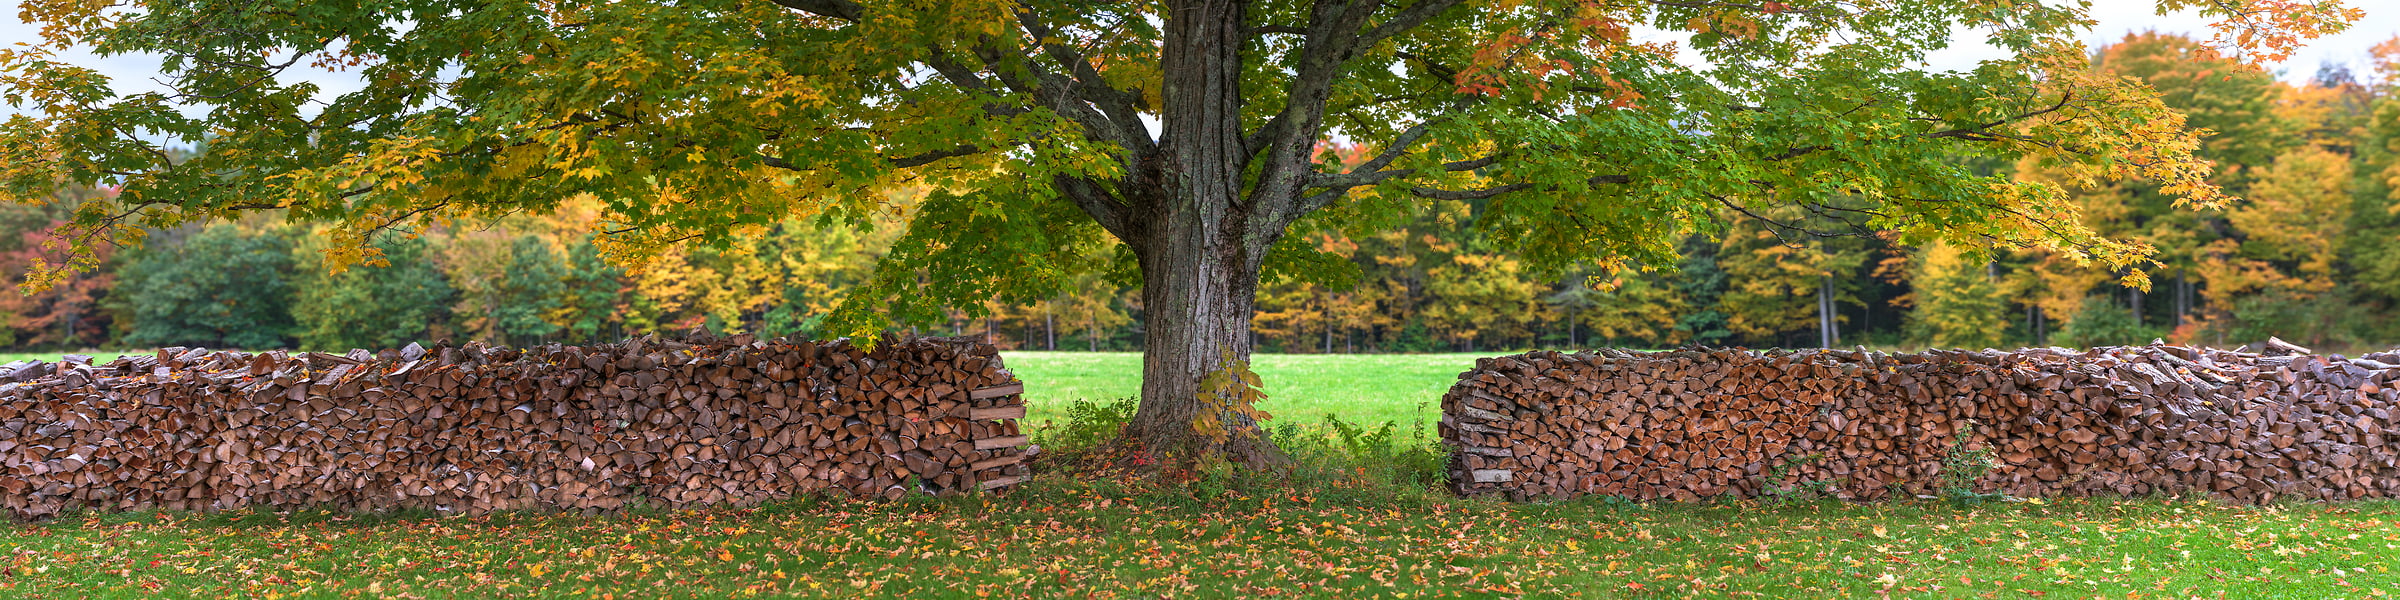 1,425 megapixels! A very high resolution, large-format VAST photo print of a woodpile and a maple tree; photograph created by Aaron Priest in Muster Field Farm, North Sutton, New Hampshire.